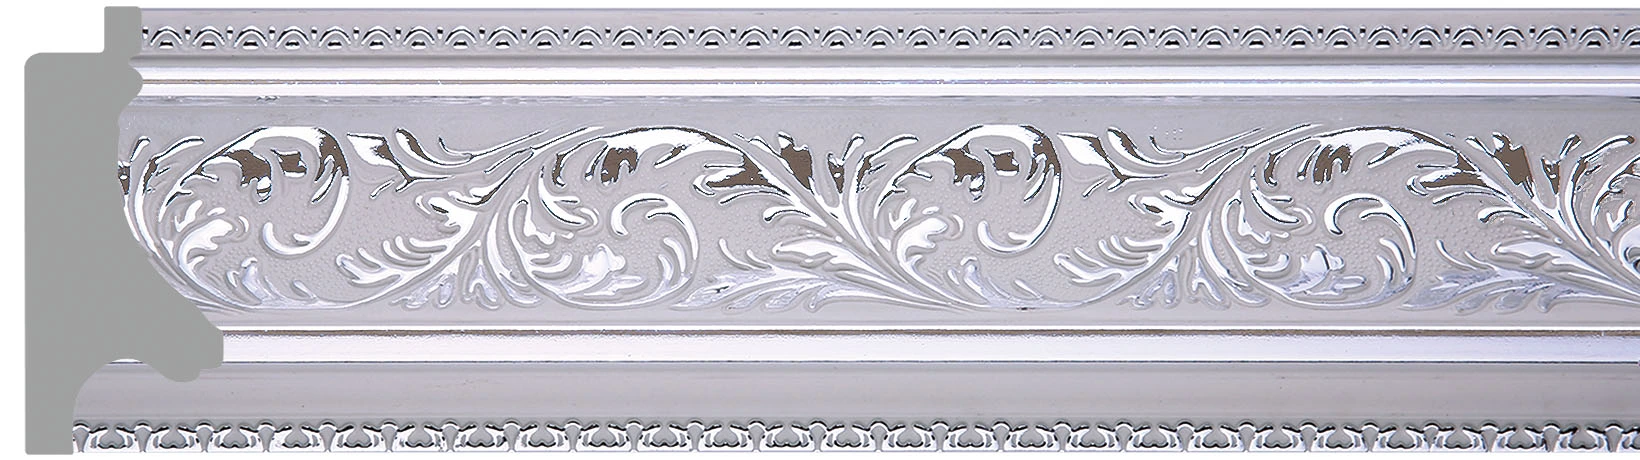 Decorative Art Frame PS Moulding Design Oil Paintings Picture Frame